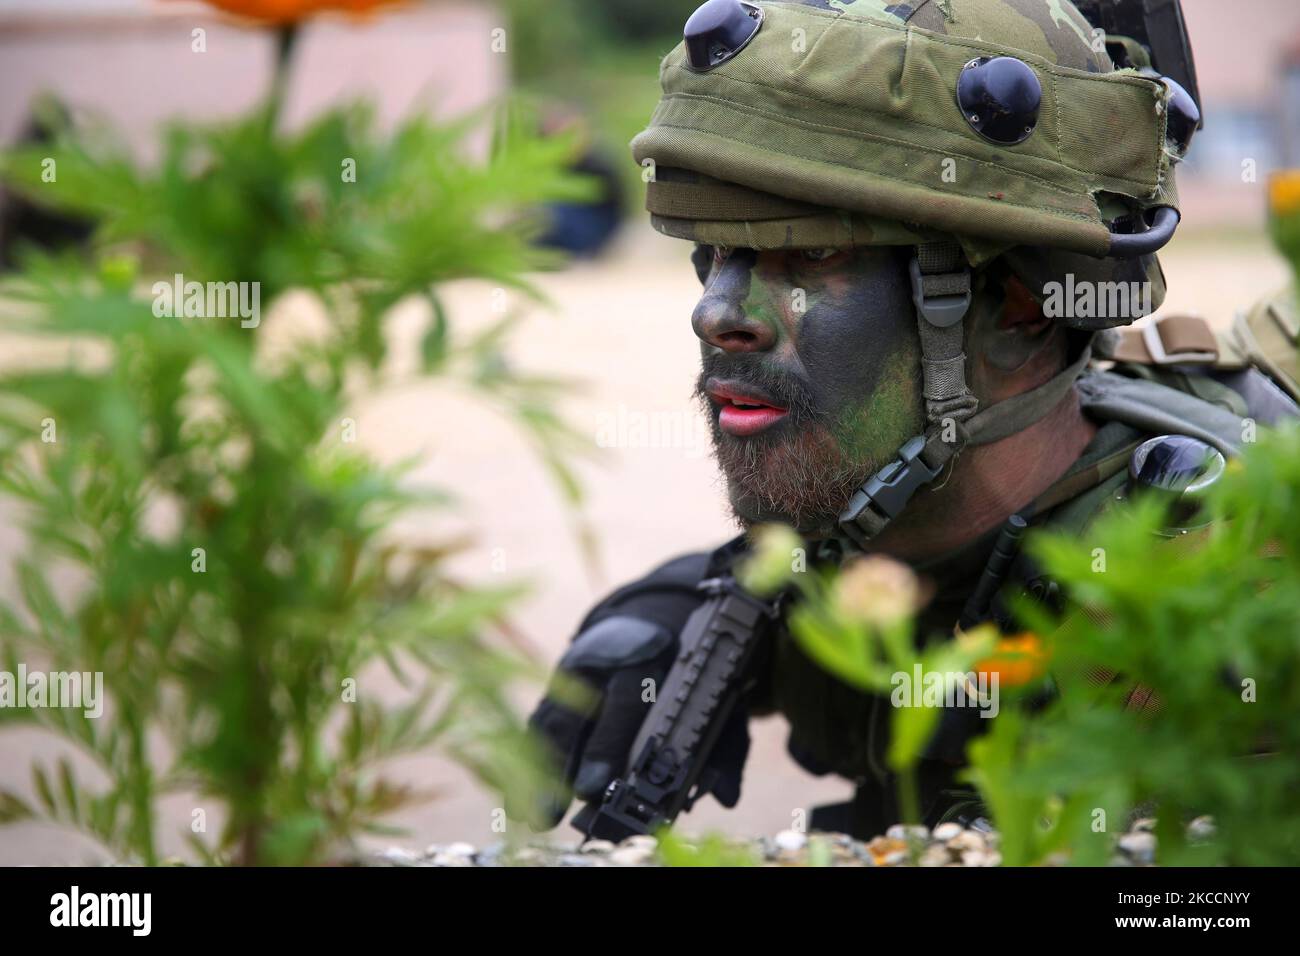 A Czech soldier provides security during a training exercise. Stock Photo